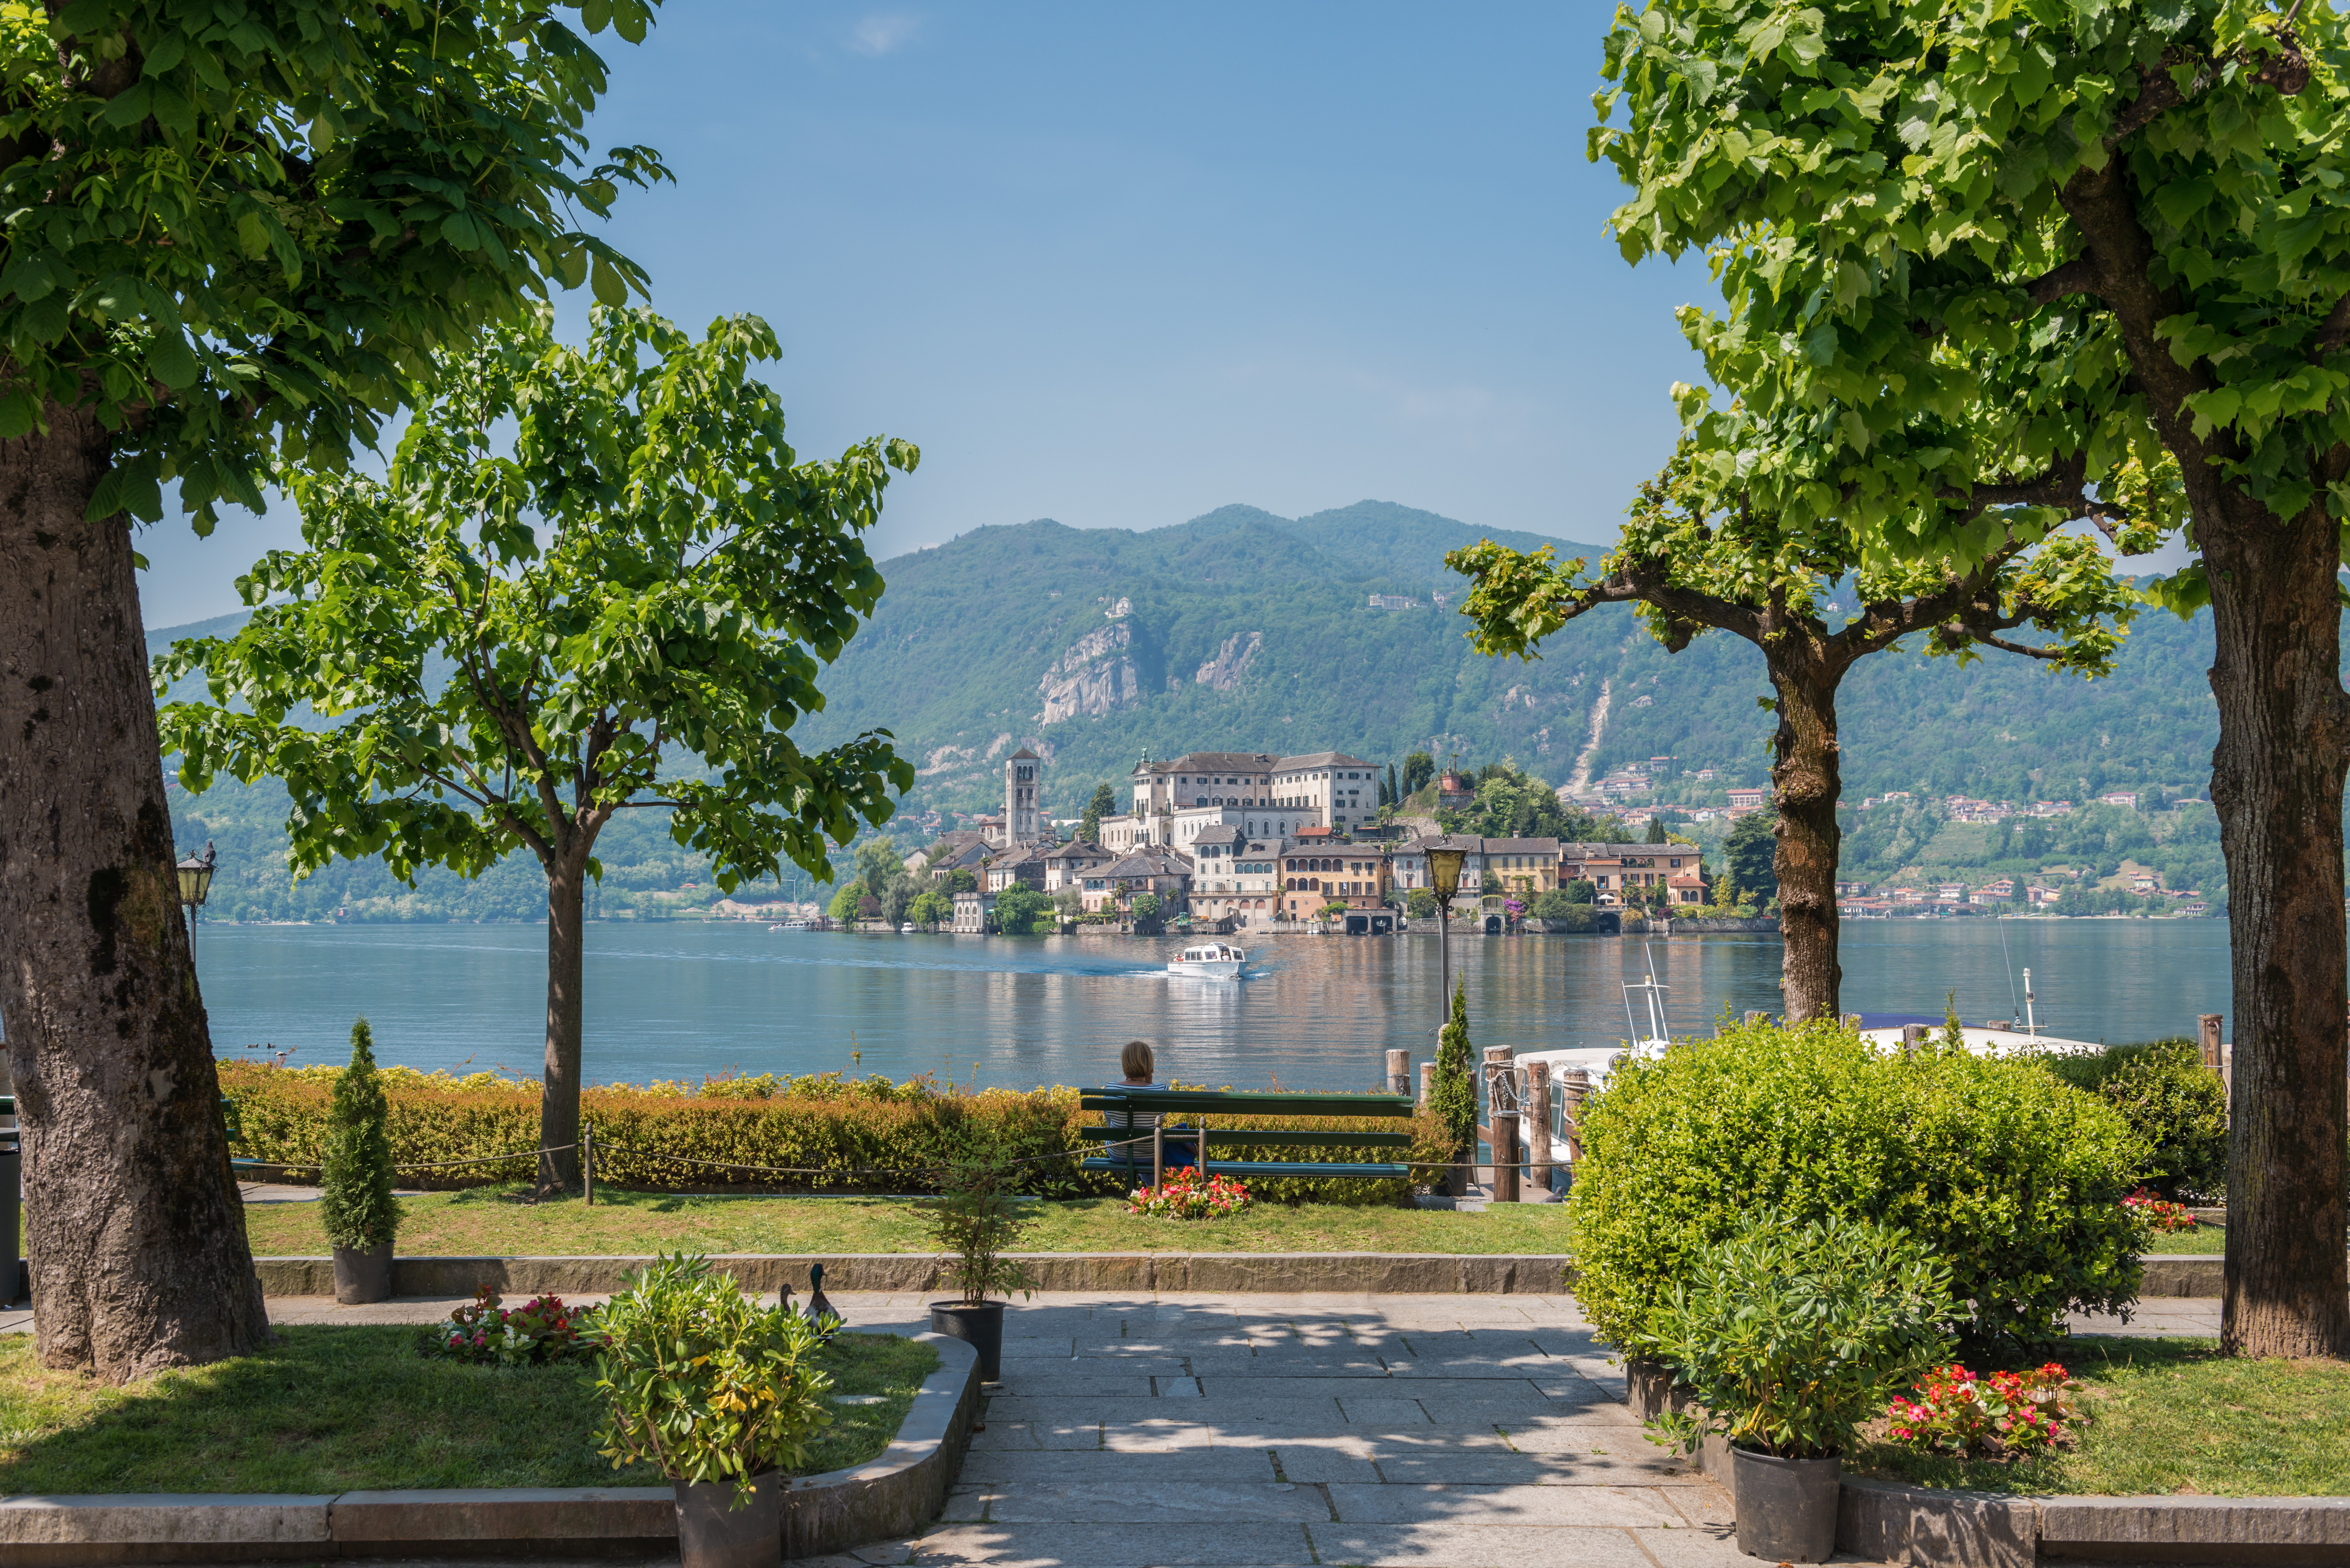 Let romance blossom in Orta San Giulio, where every piazza tells a tale of passion